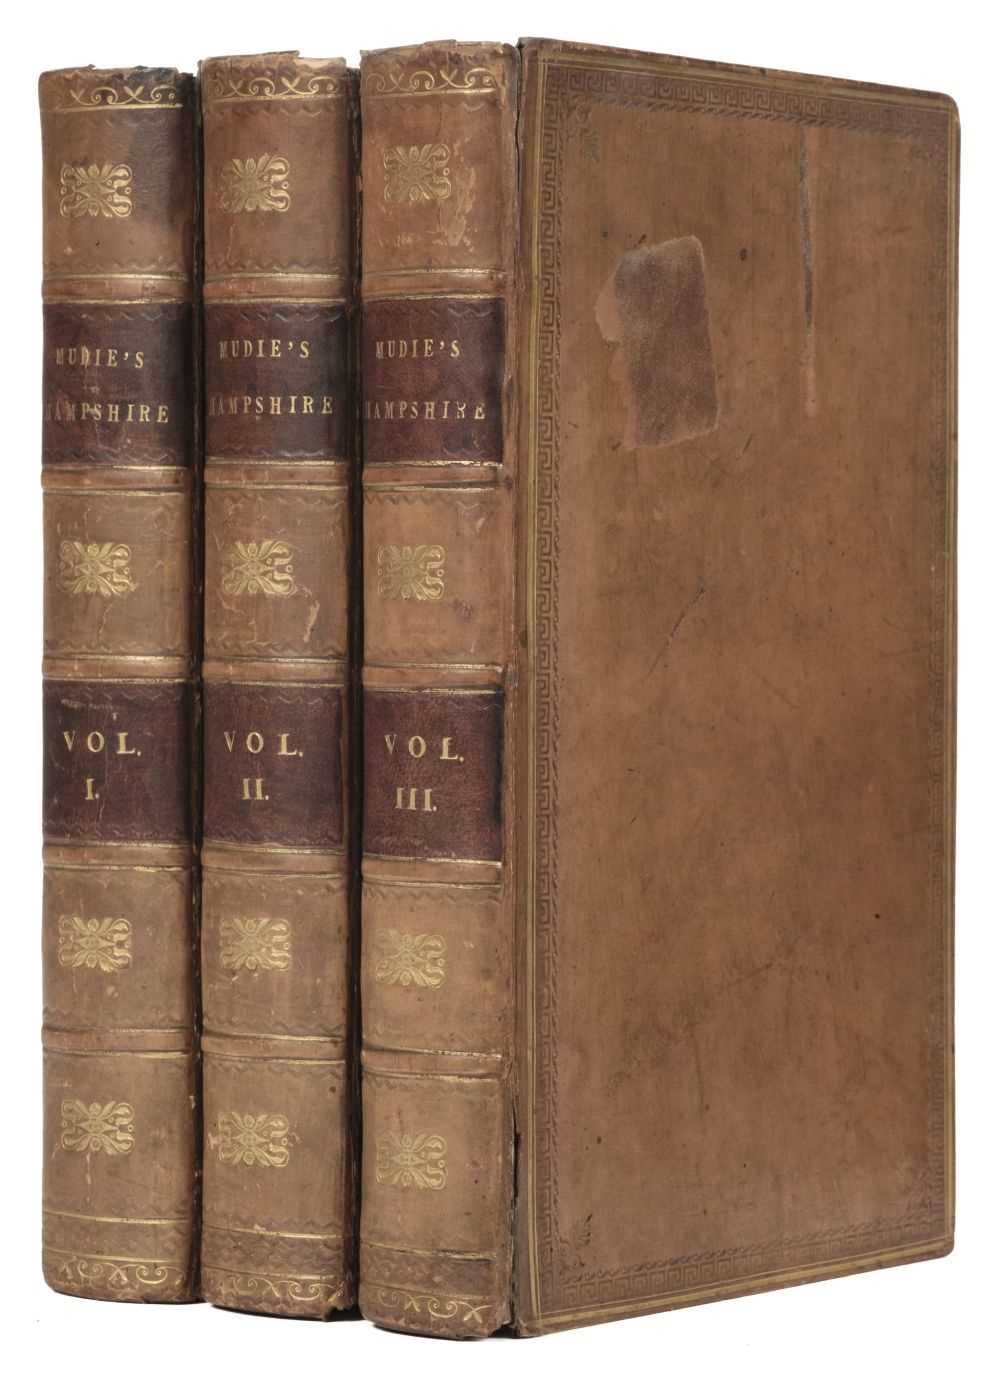 Lot 51 - Mudie (Robert). Hampshire: Its Past and Present Condition and Future prospects, 1838